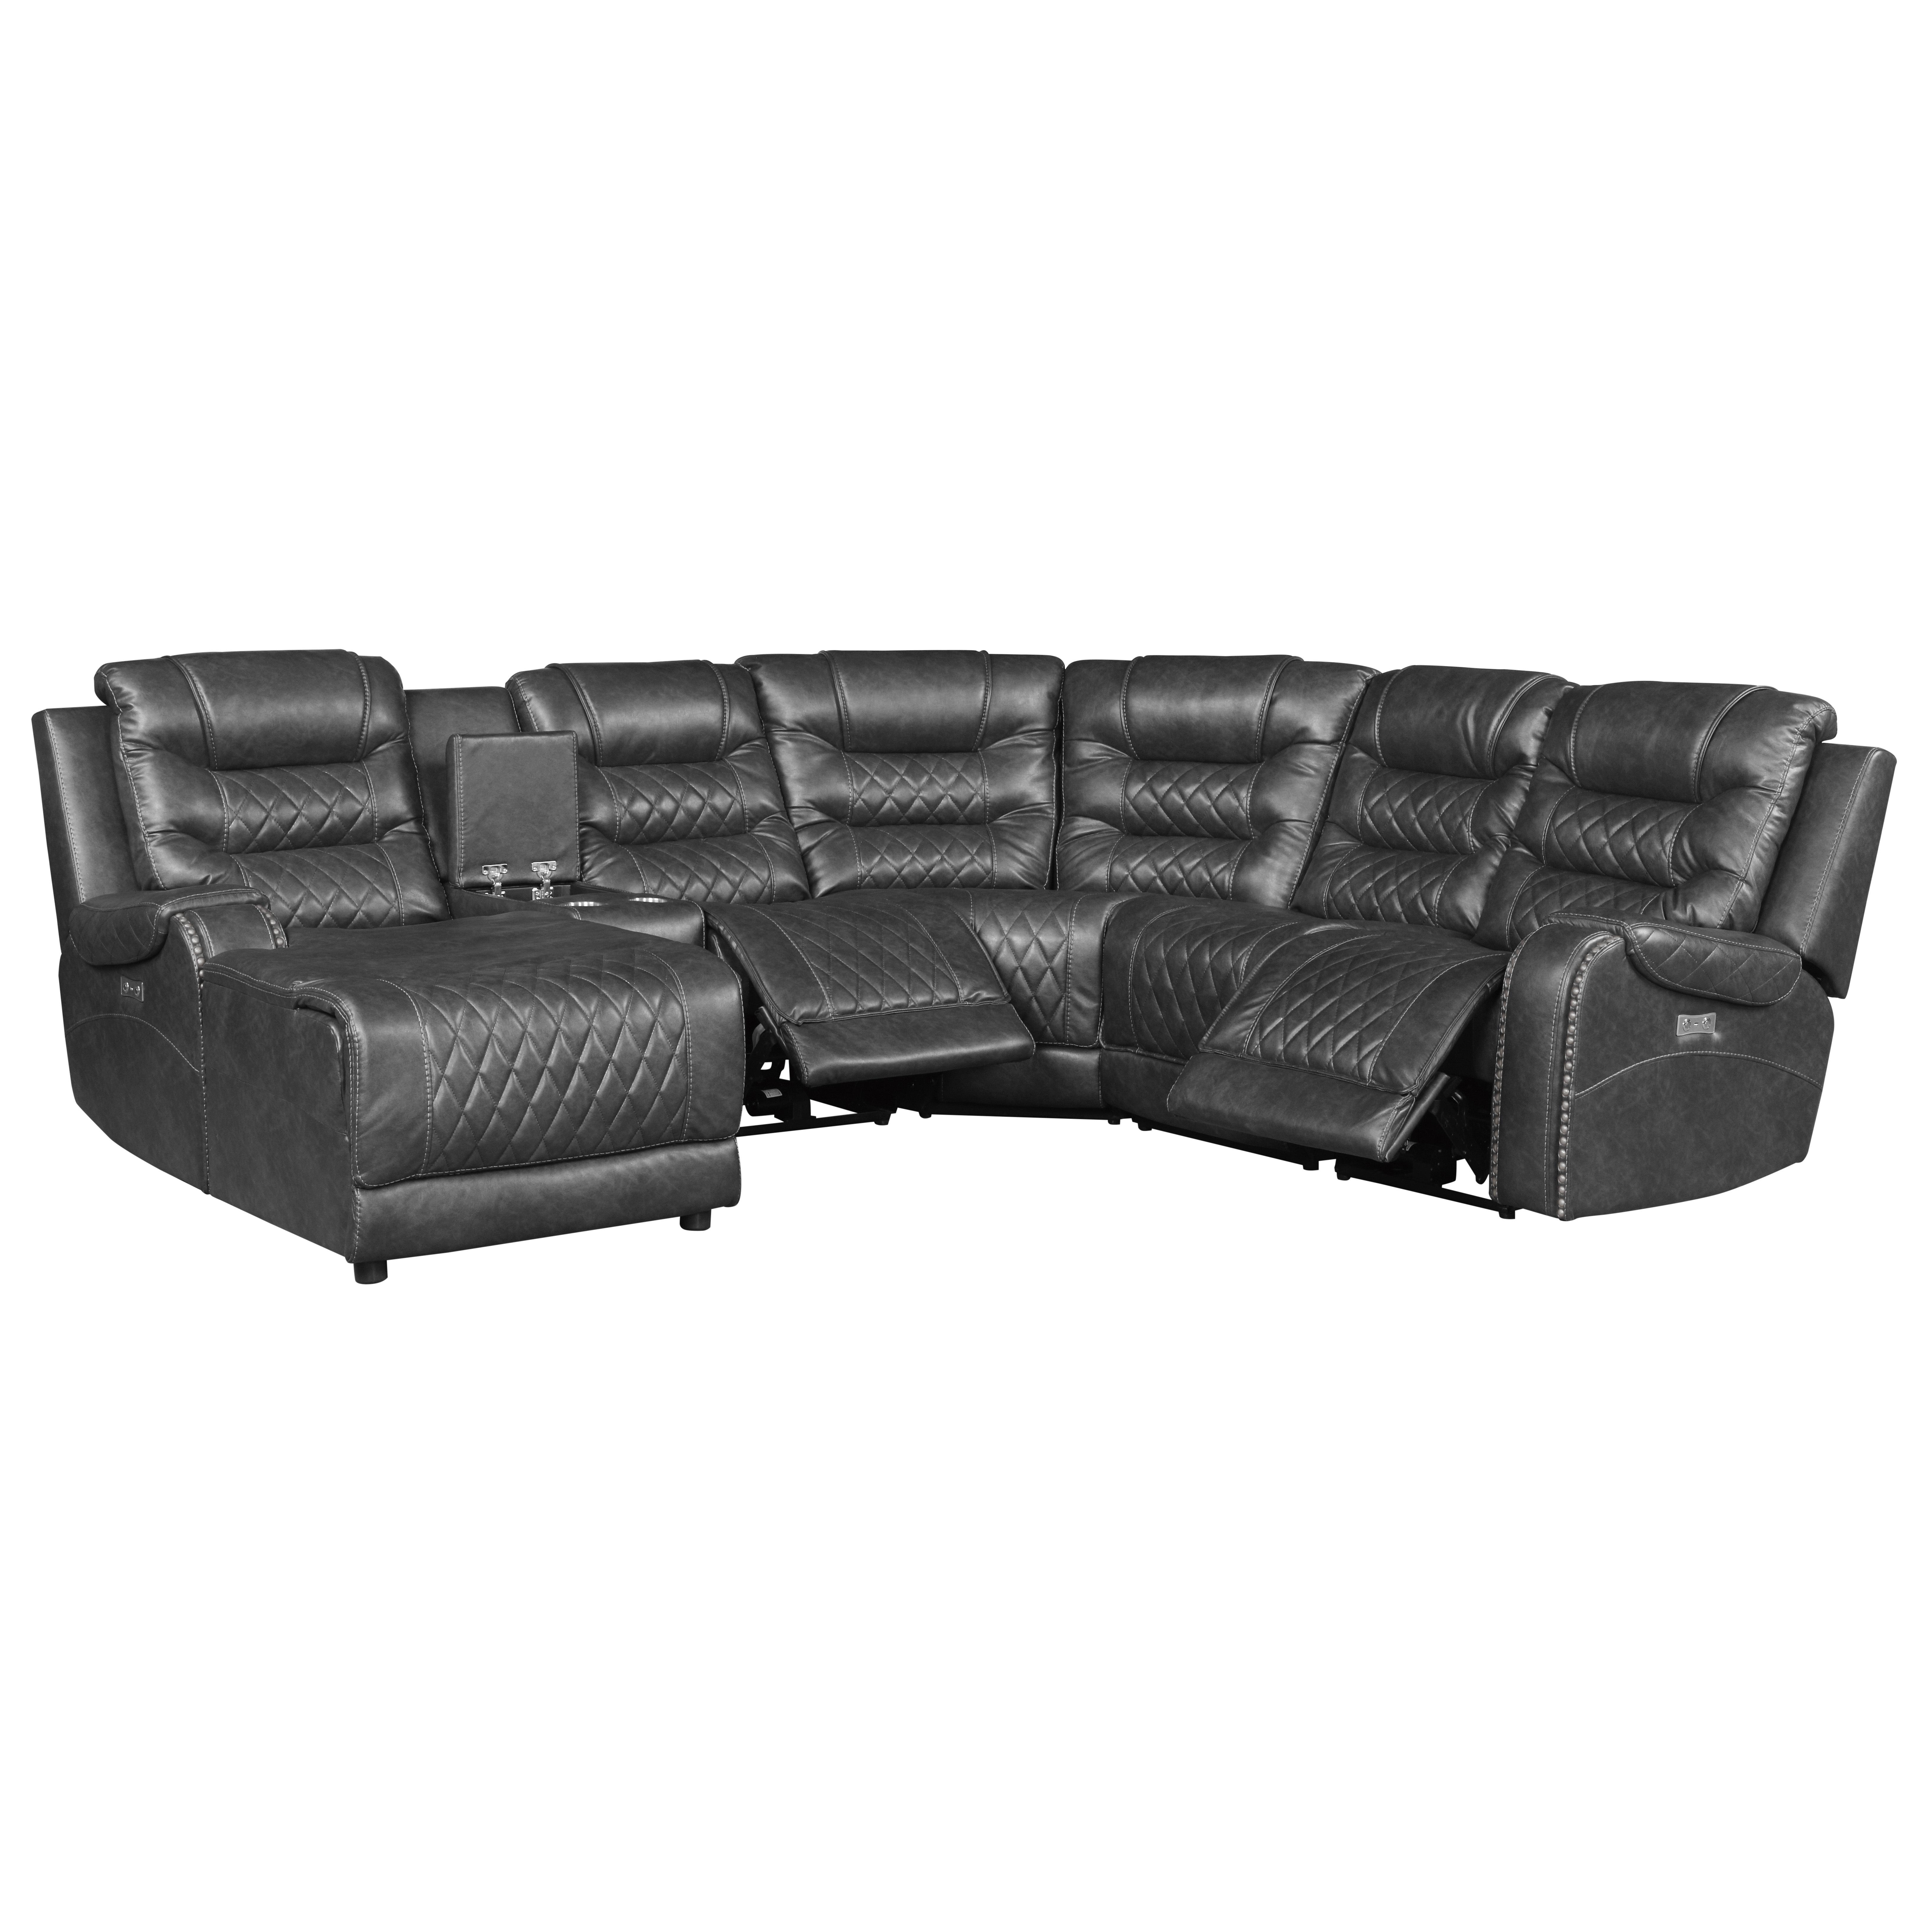 

    
Homelegance 9405GY*6LCRR Putnam Power Reclining Sectional Gray 9405GY*6LCRR
